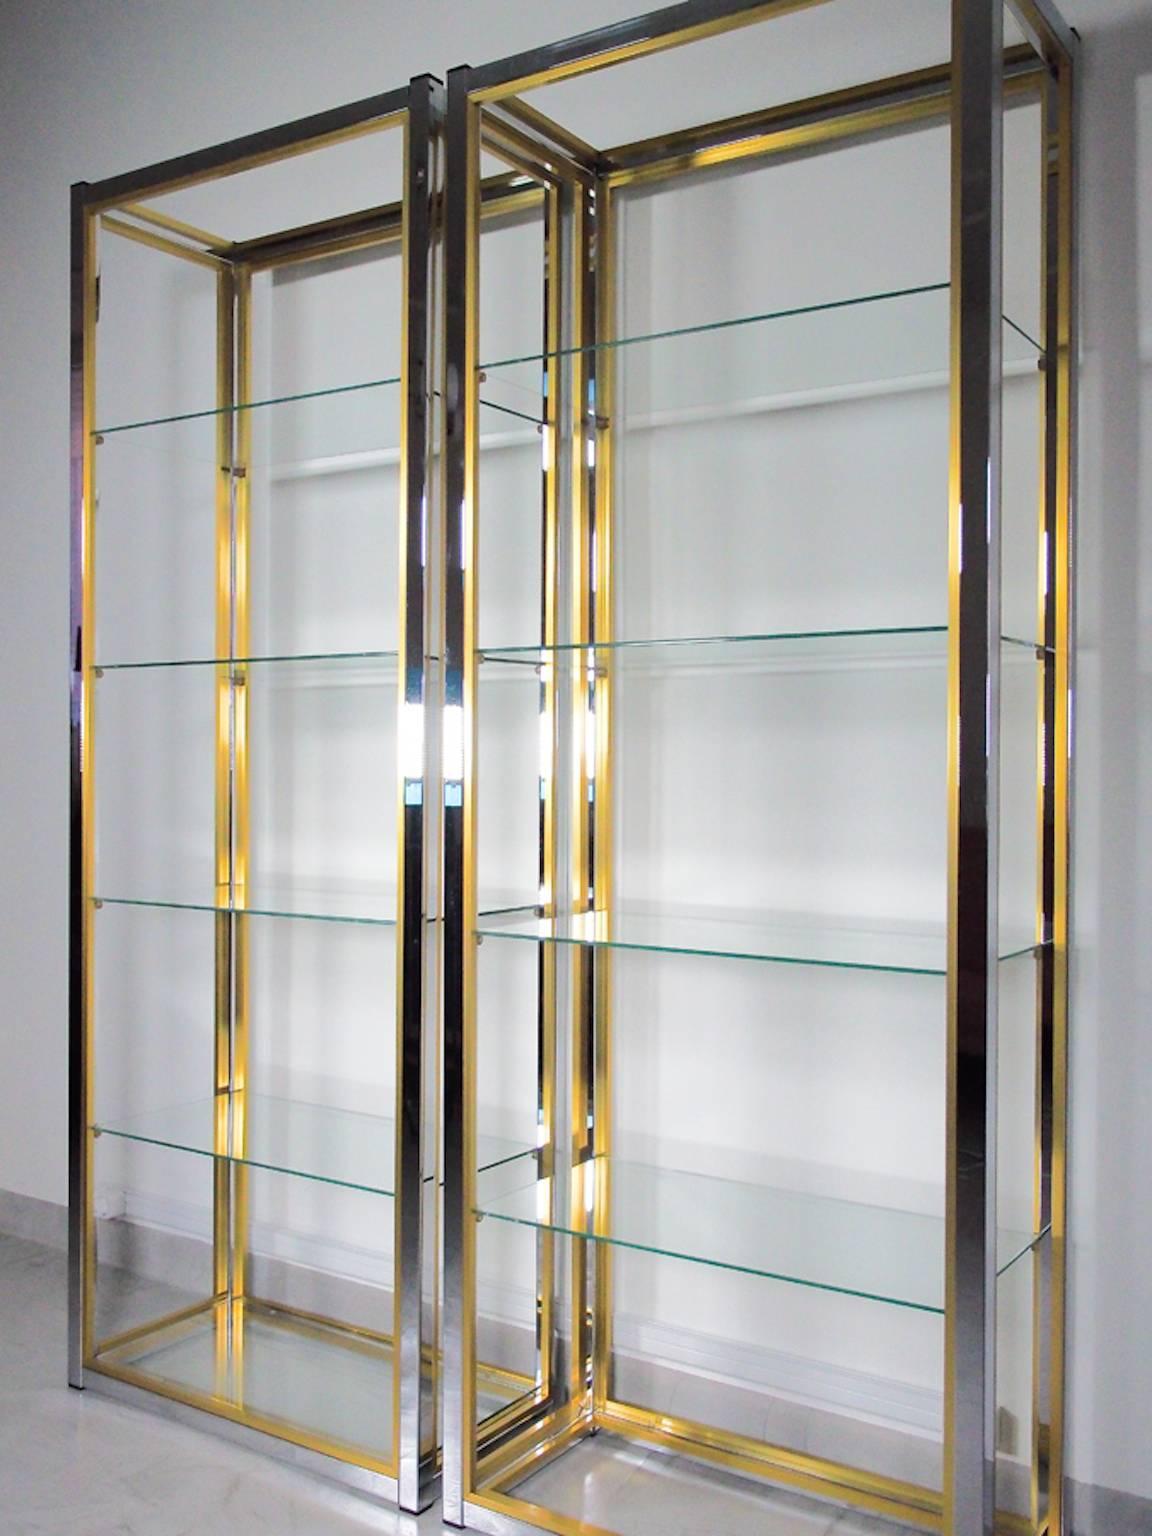 Pair of polished chrome and glass shelves by Italian designer Renato Zevi. Elegant étagère that can be used as a room divider. Shelves made of glass.